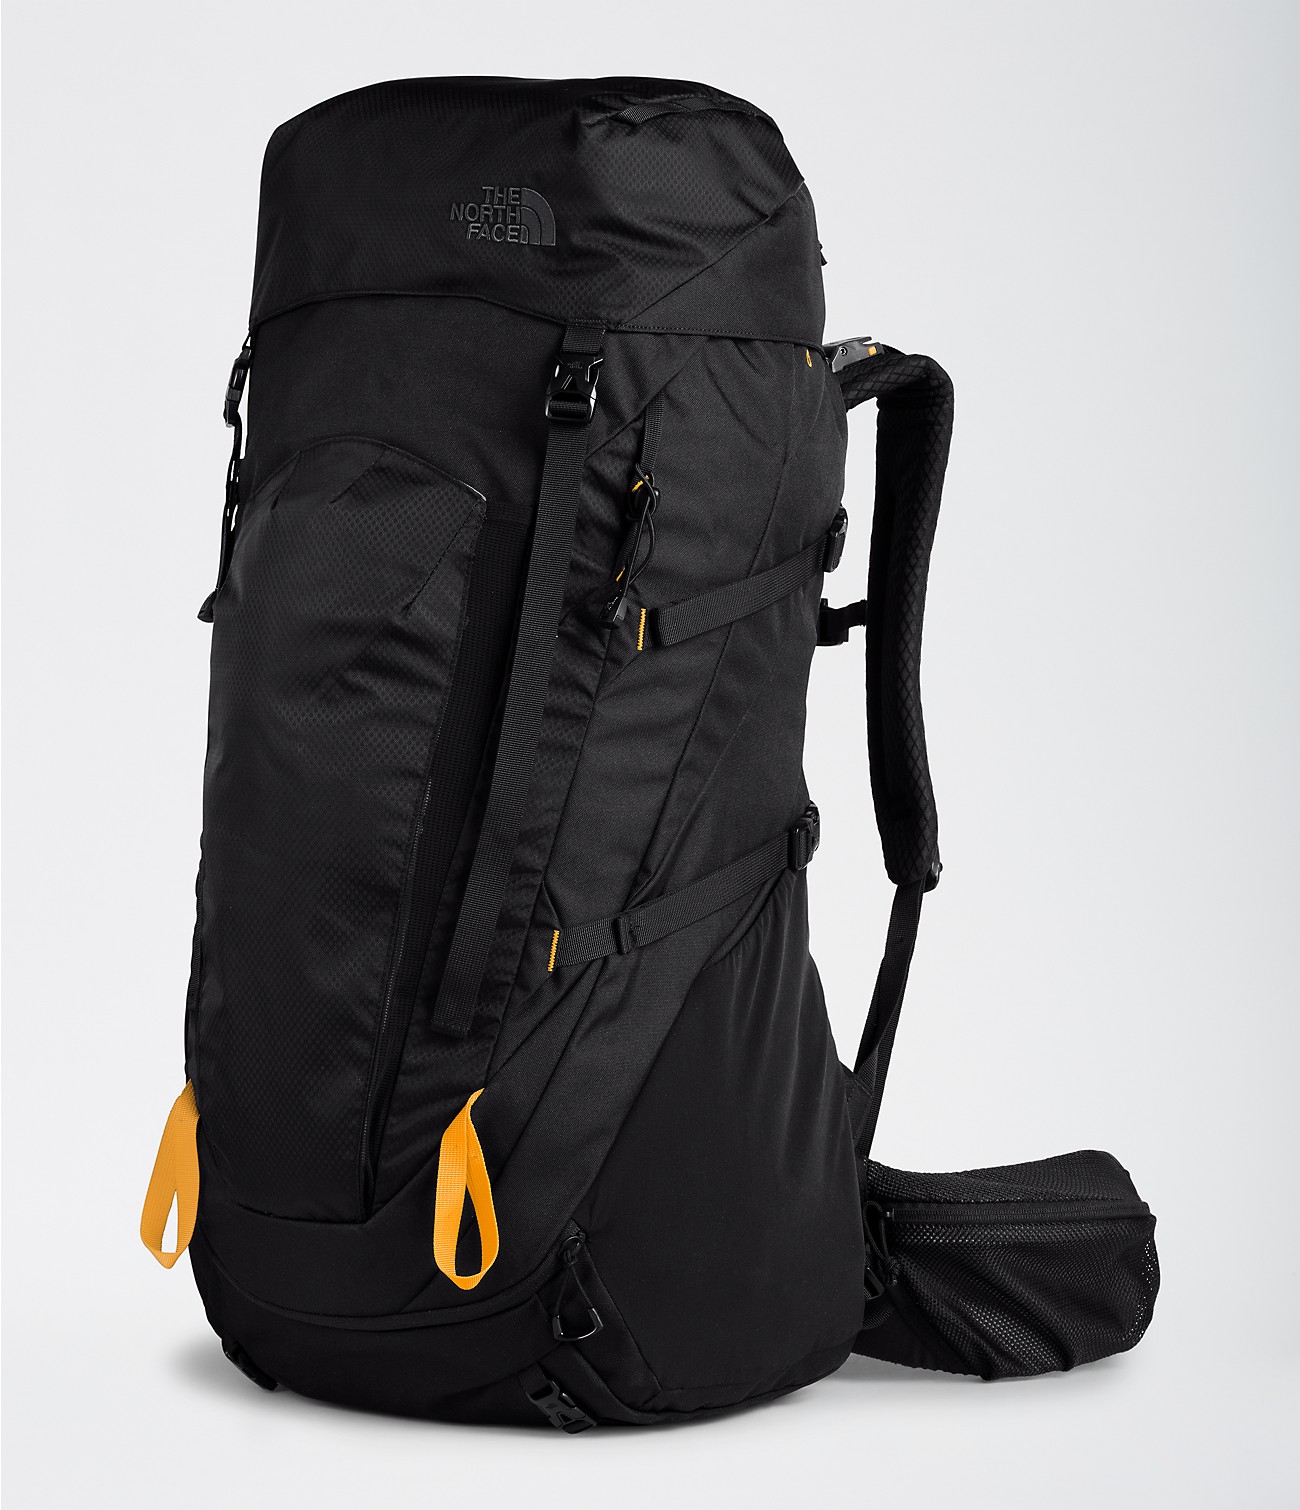 Unlock Wilderness' choice in the Decathlon Vs North Face comparison, the Terra 65 Backpack by The North Face